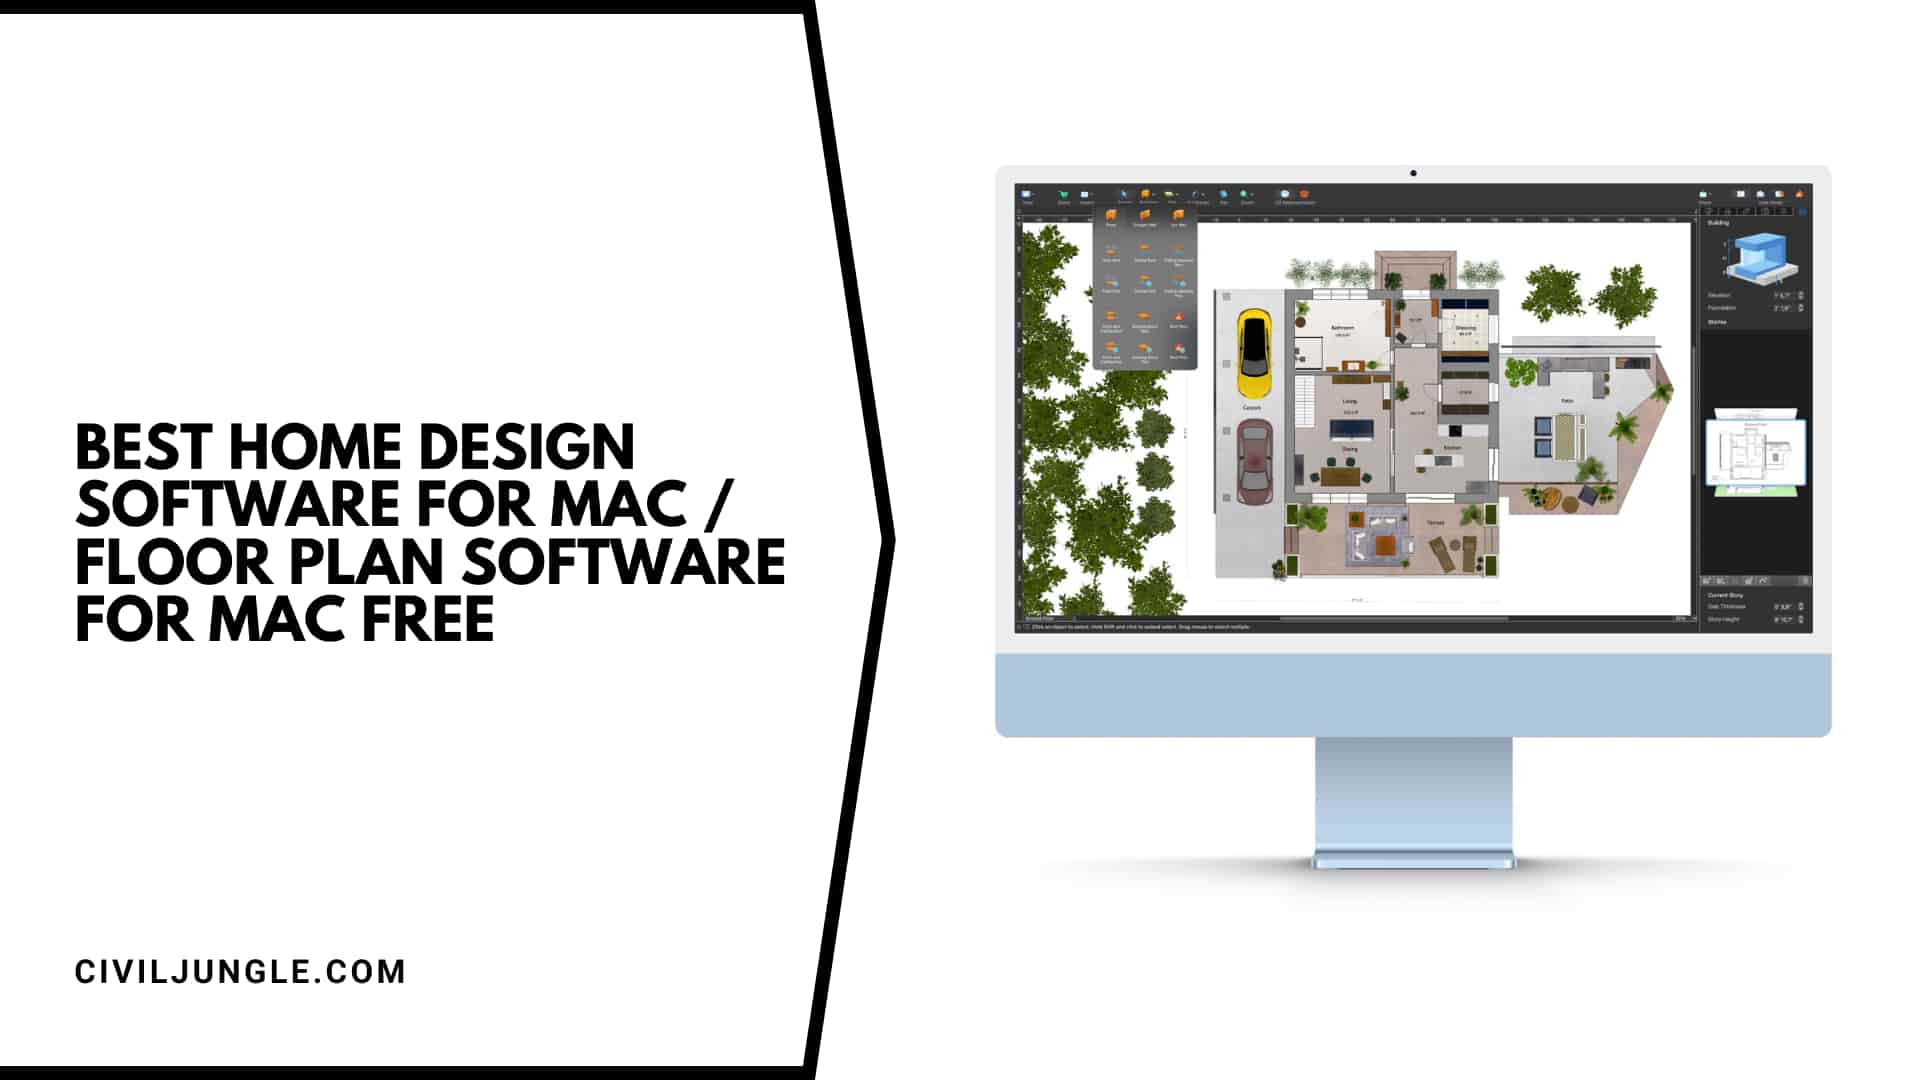 Best Home Design Software for Mac / Floor Plan Software for Mac Free